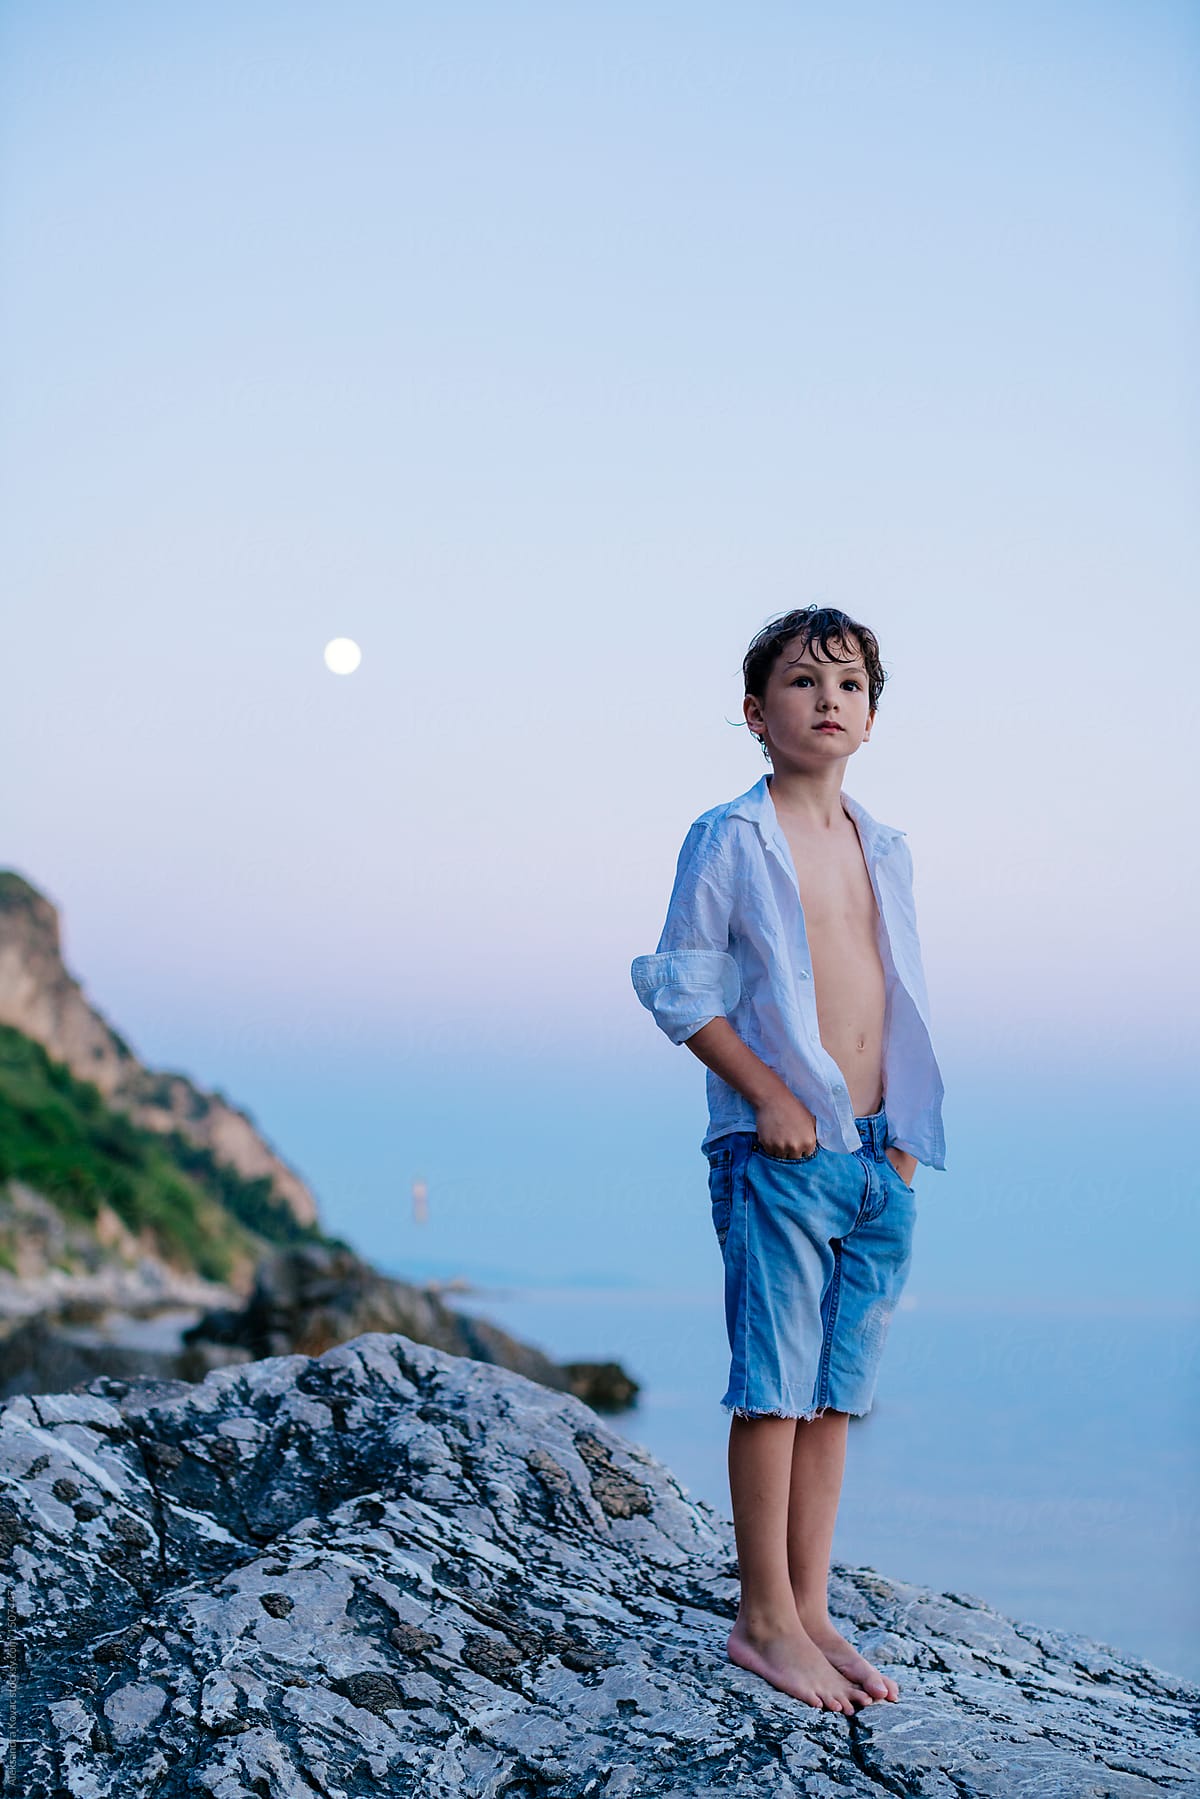 A boy child stands on rock by the sea at moonlight